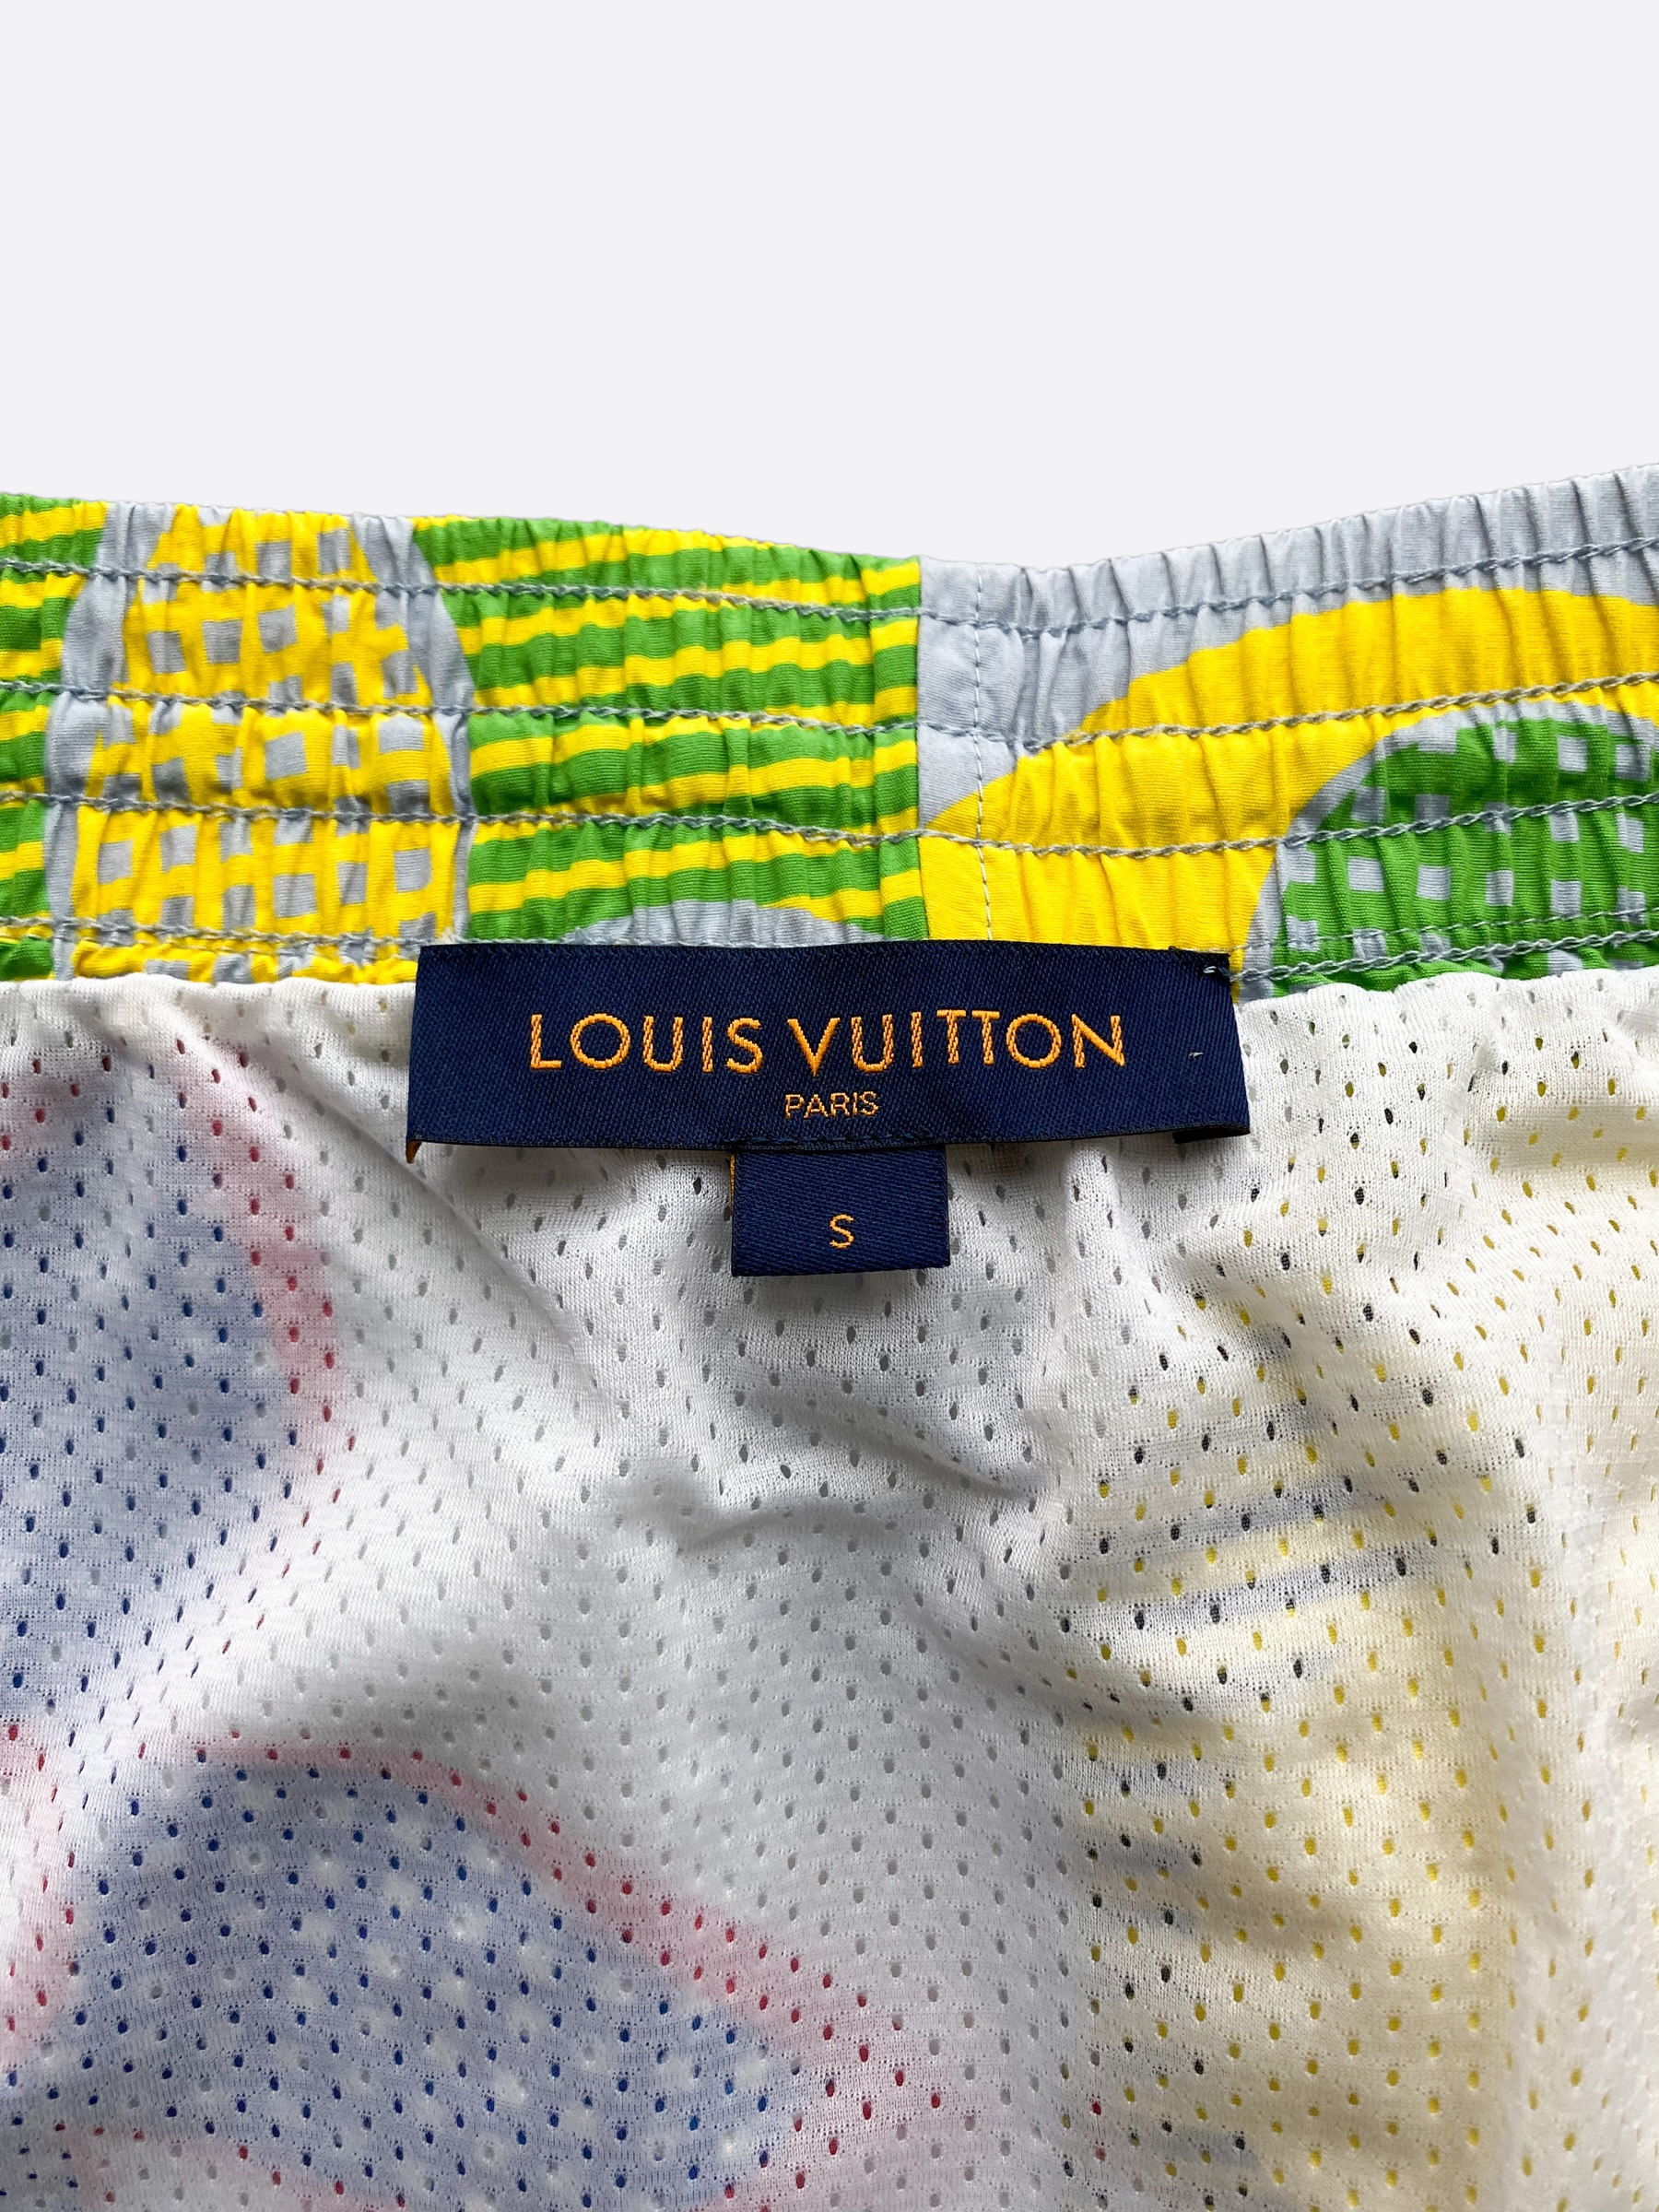 Louis Vuitton Signature Board Swimshorts Cheddar. Size Xs